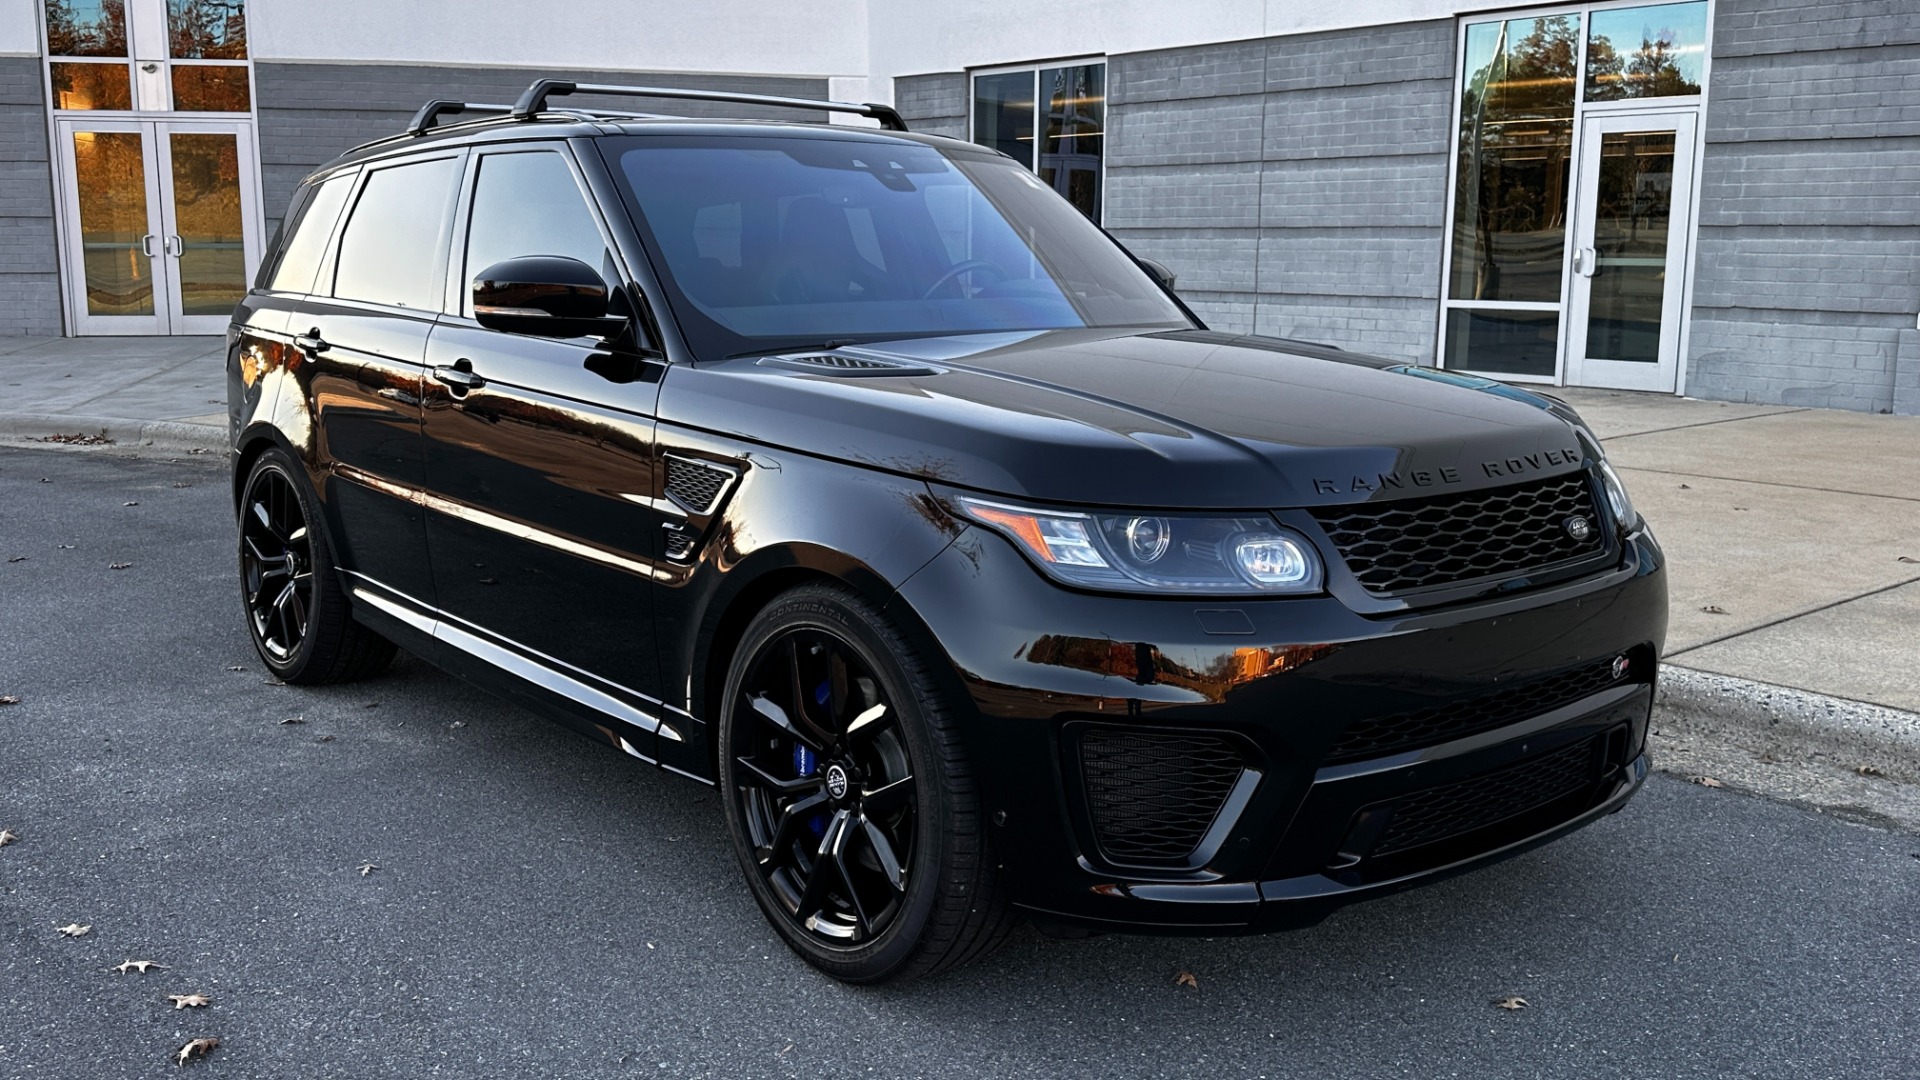 Used 2017 Land Rover Range Rover Sport SVR / DRIVE PRO PACKAGE / MERIDIAN SURROUND SOUND / SUPERCHARGED V8 / PANOR for sale Sold at Formula Imports in Charlotte NC 28227 4